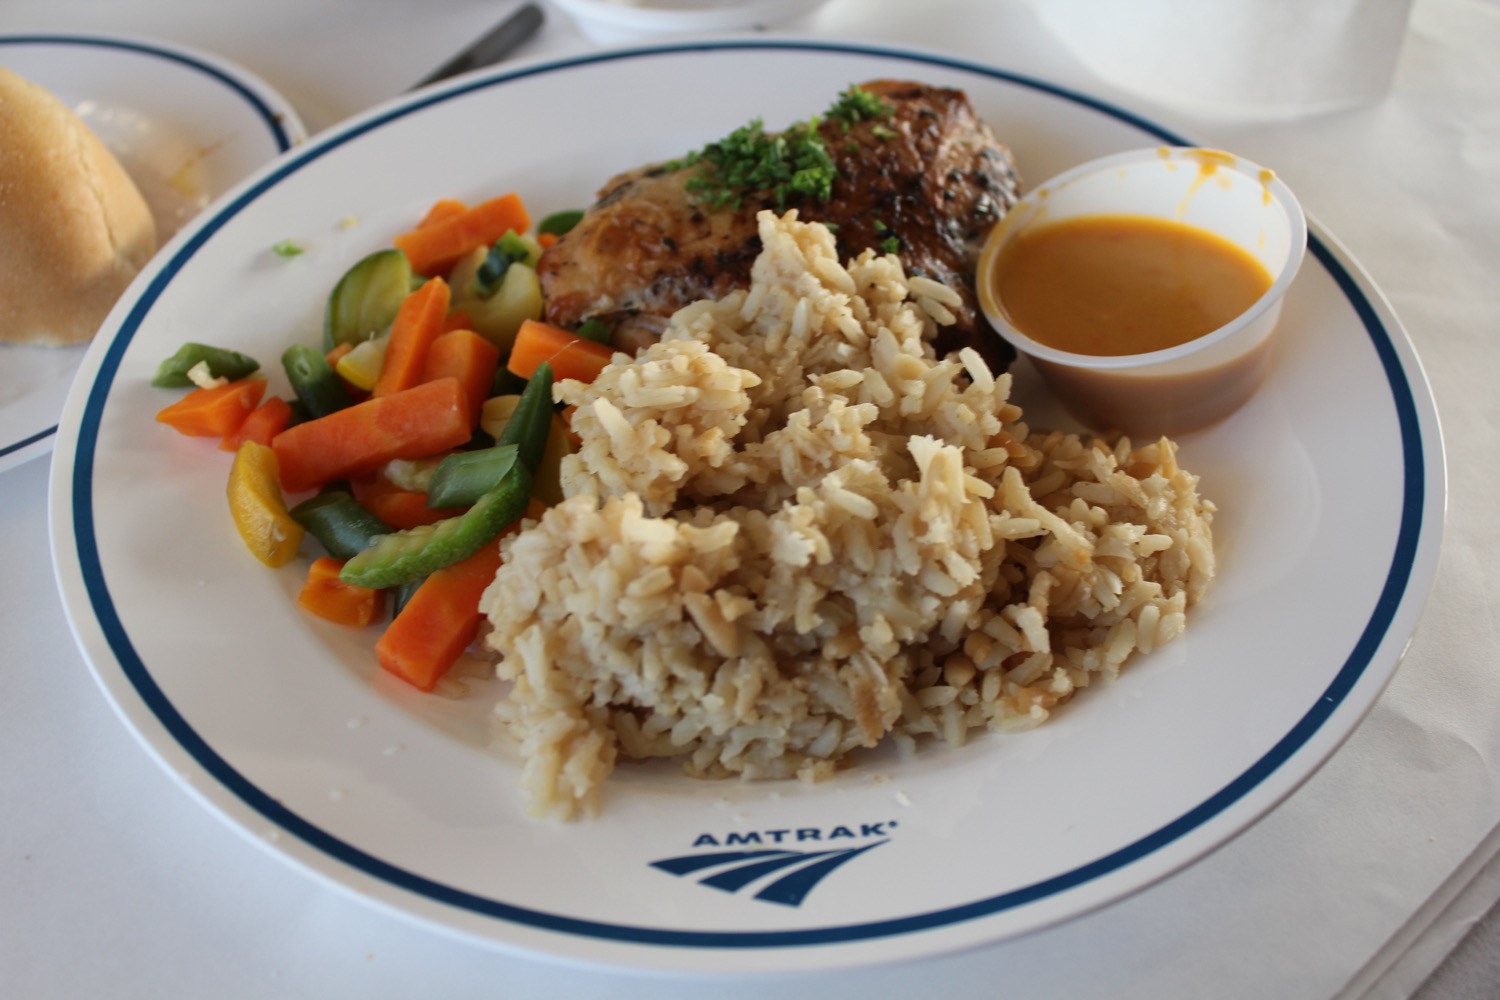 a plate of food with a sauce and rice